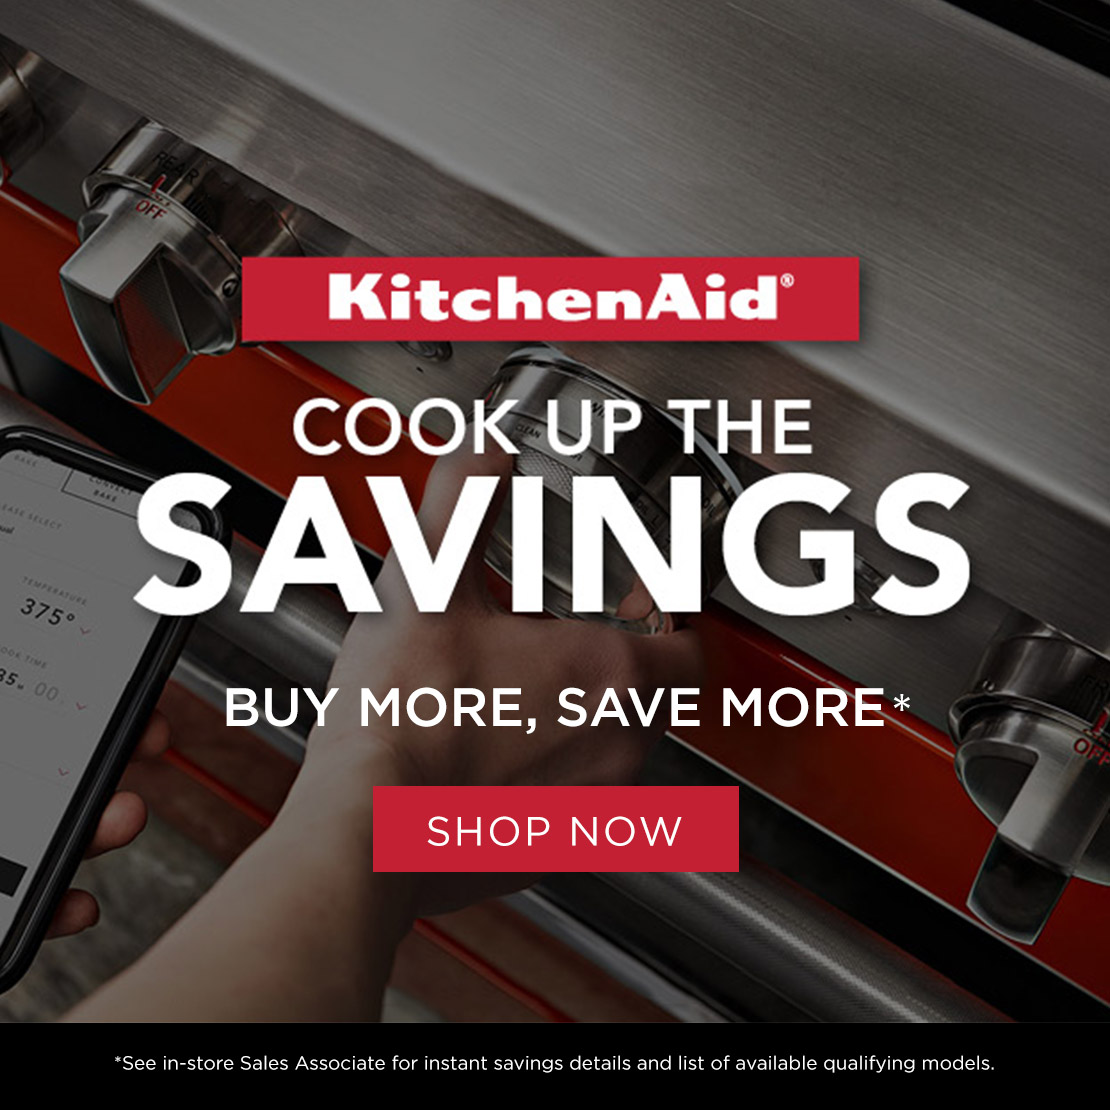 KitchenAid Cook Up The Savings Event